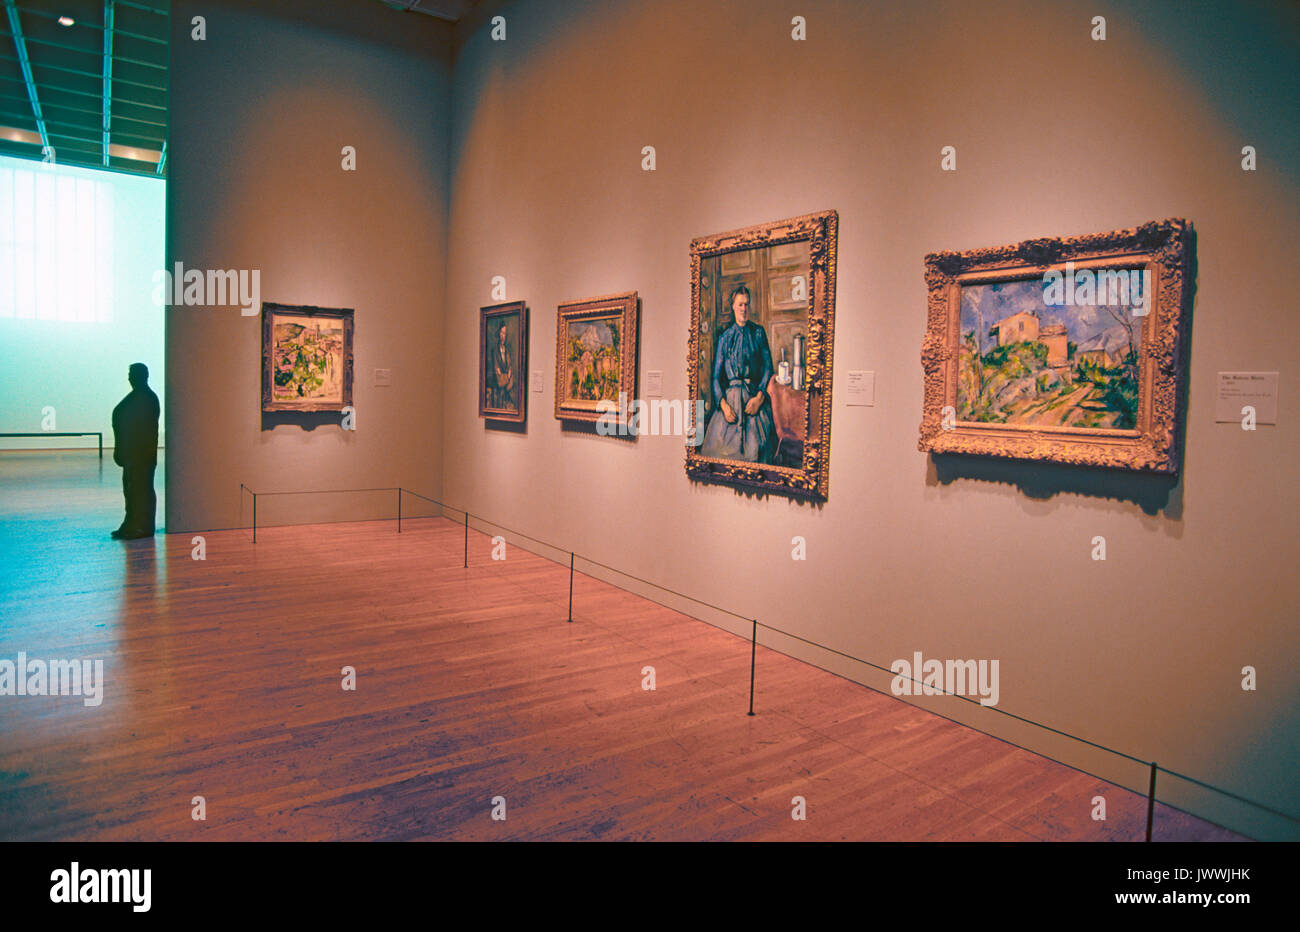 A security guard watches over a gallery of old master paintings in the Philadelphia Museum of Art, Pennsylvania Stock Photo